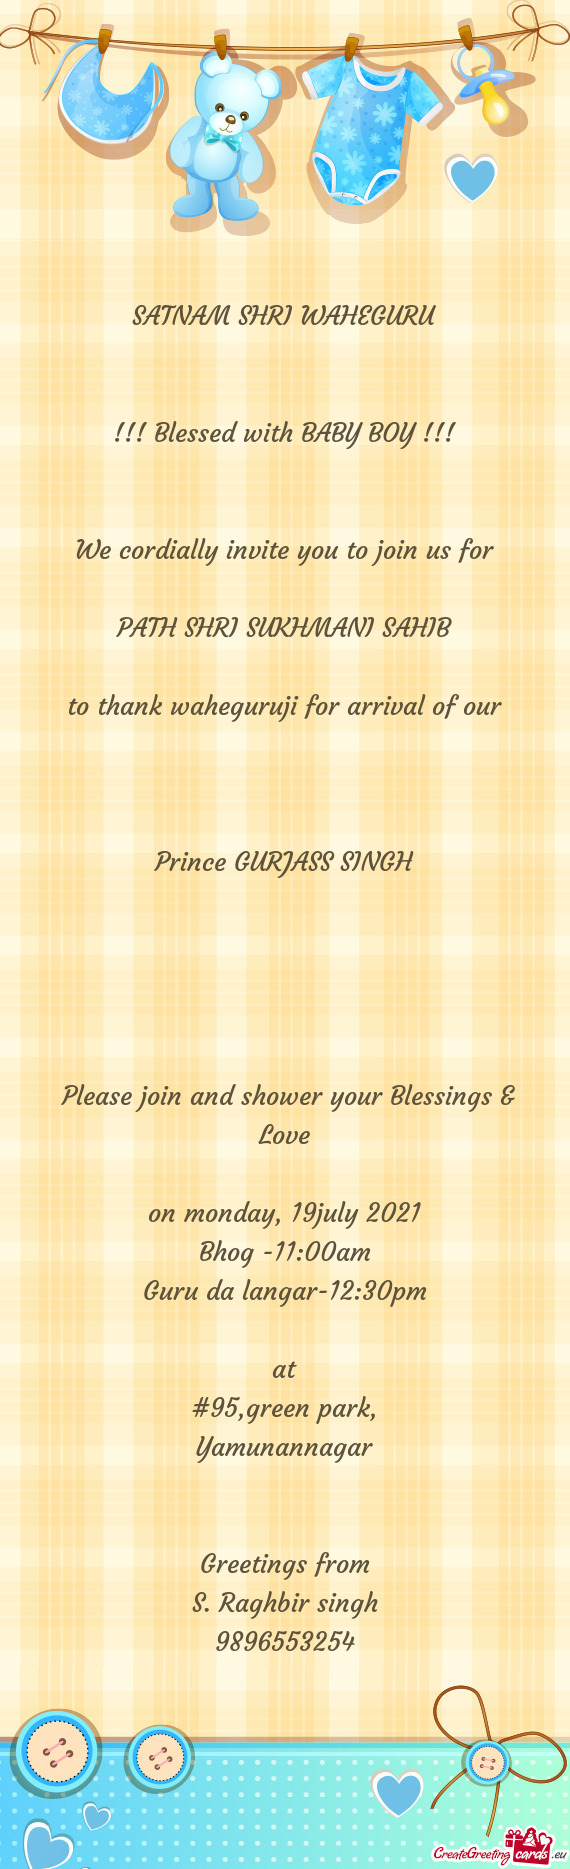 To thank waheguruji for arrival of our